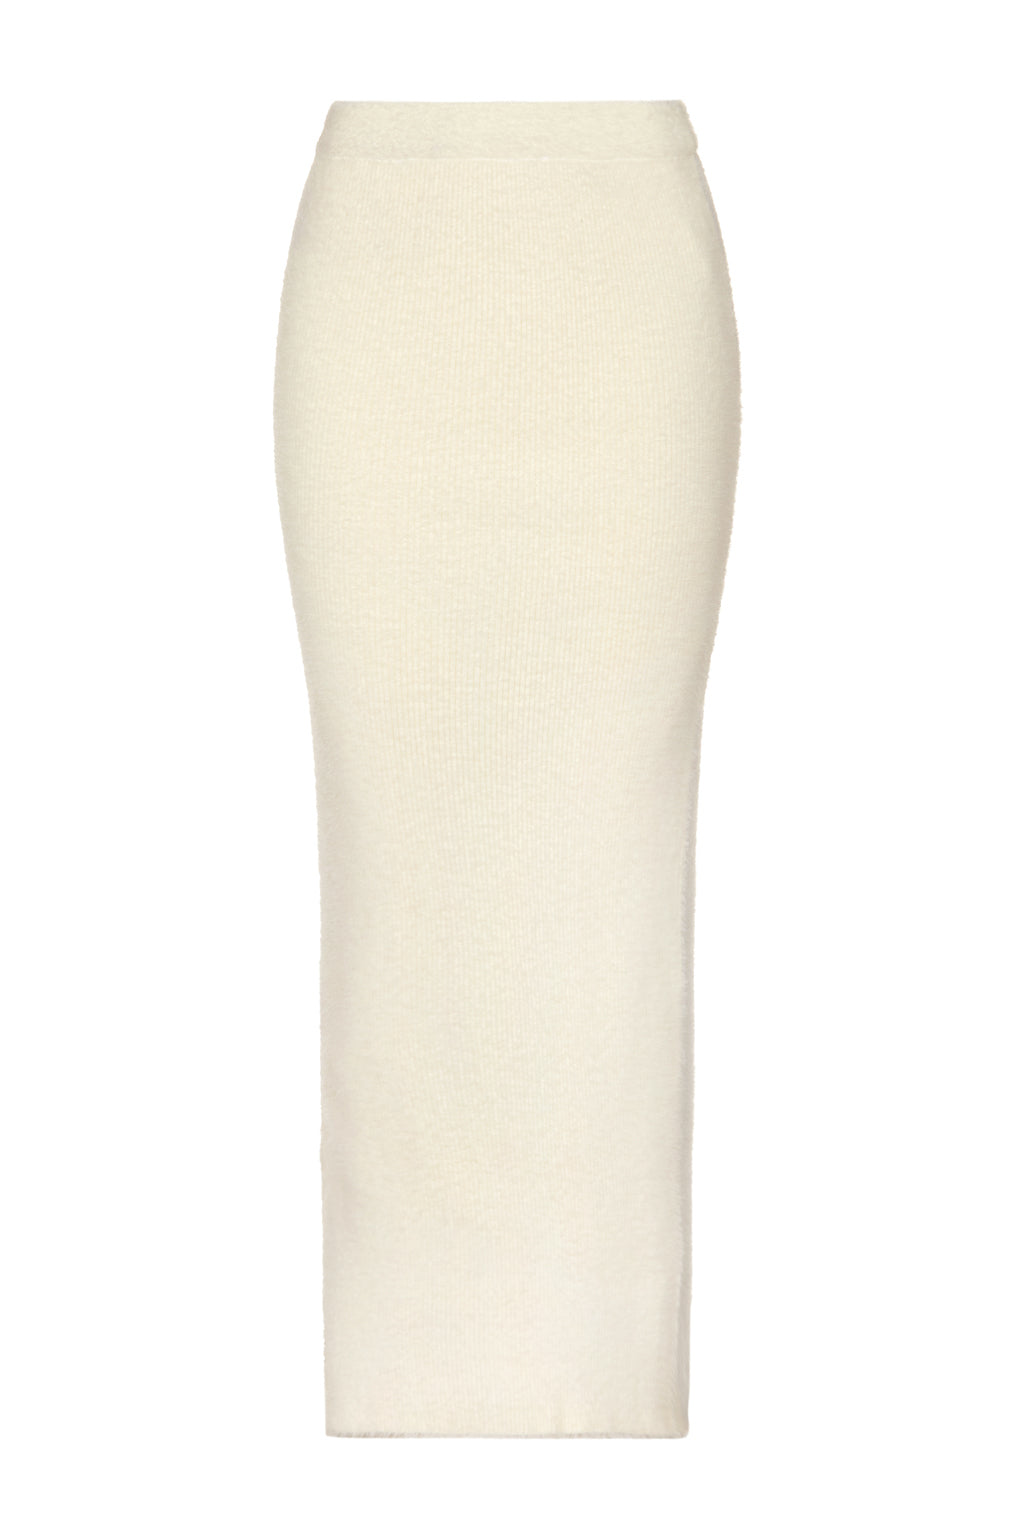 PHUZZ Mohair Graphic Rib Maxi in Ivory